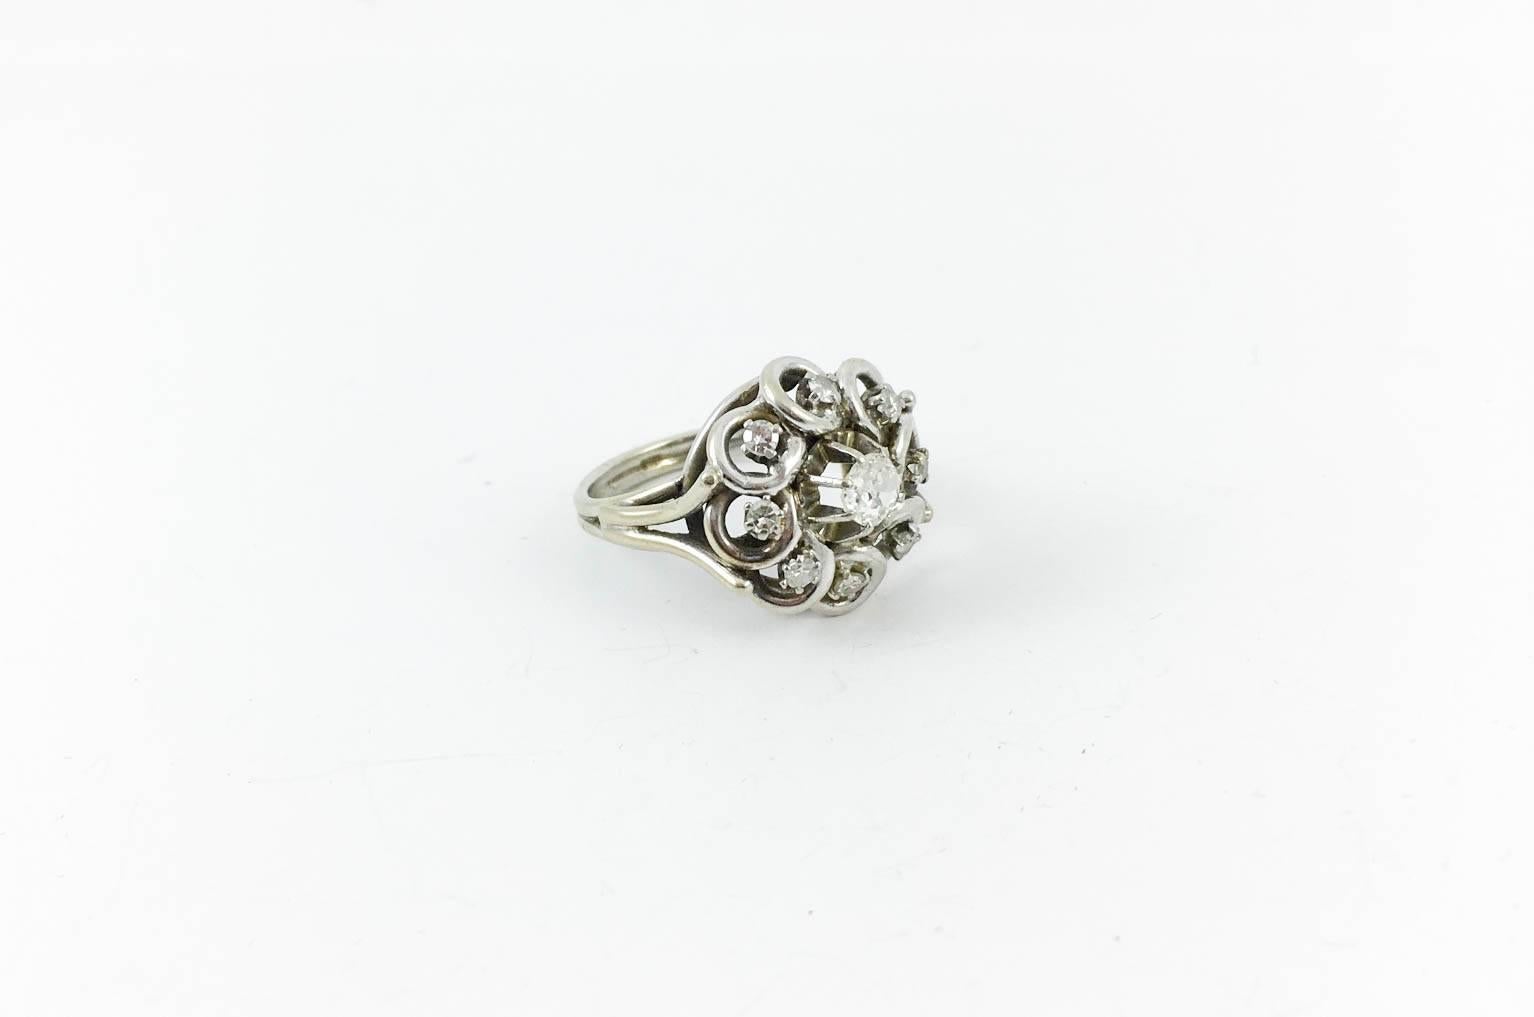 Stunning Vintage White Gold, Platinum and Diamond Cluster Ring. This great piece of jewellery has a beautiful flower inspired design featuring diamonds. Stylish and timeless ring.

 

Period: 1940s

Origin: France

Materials: 18ct Gold,